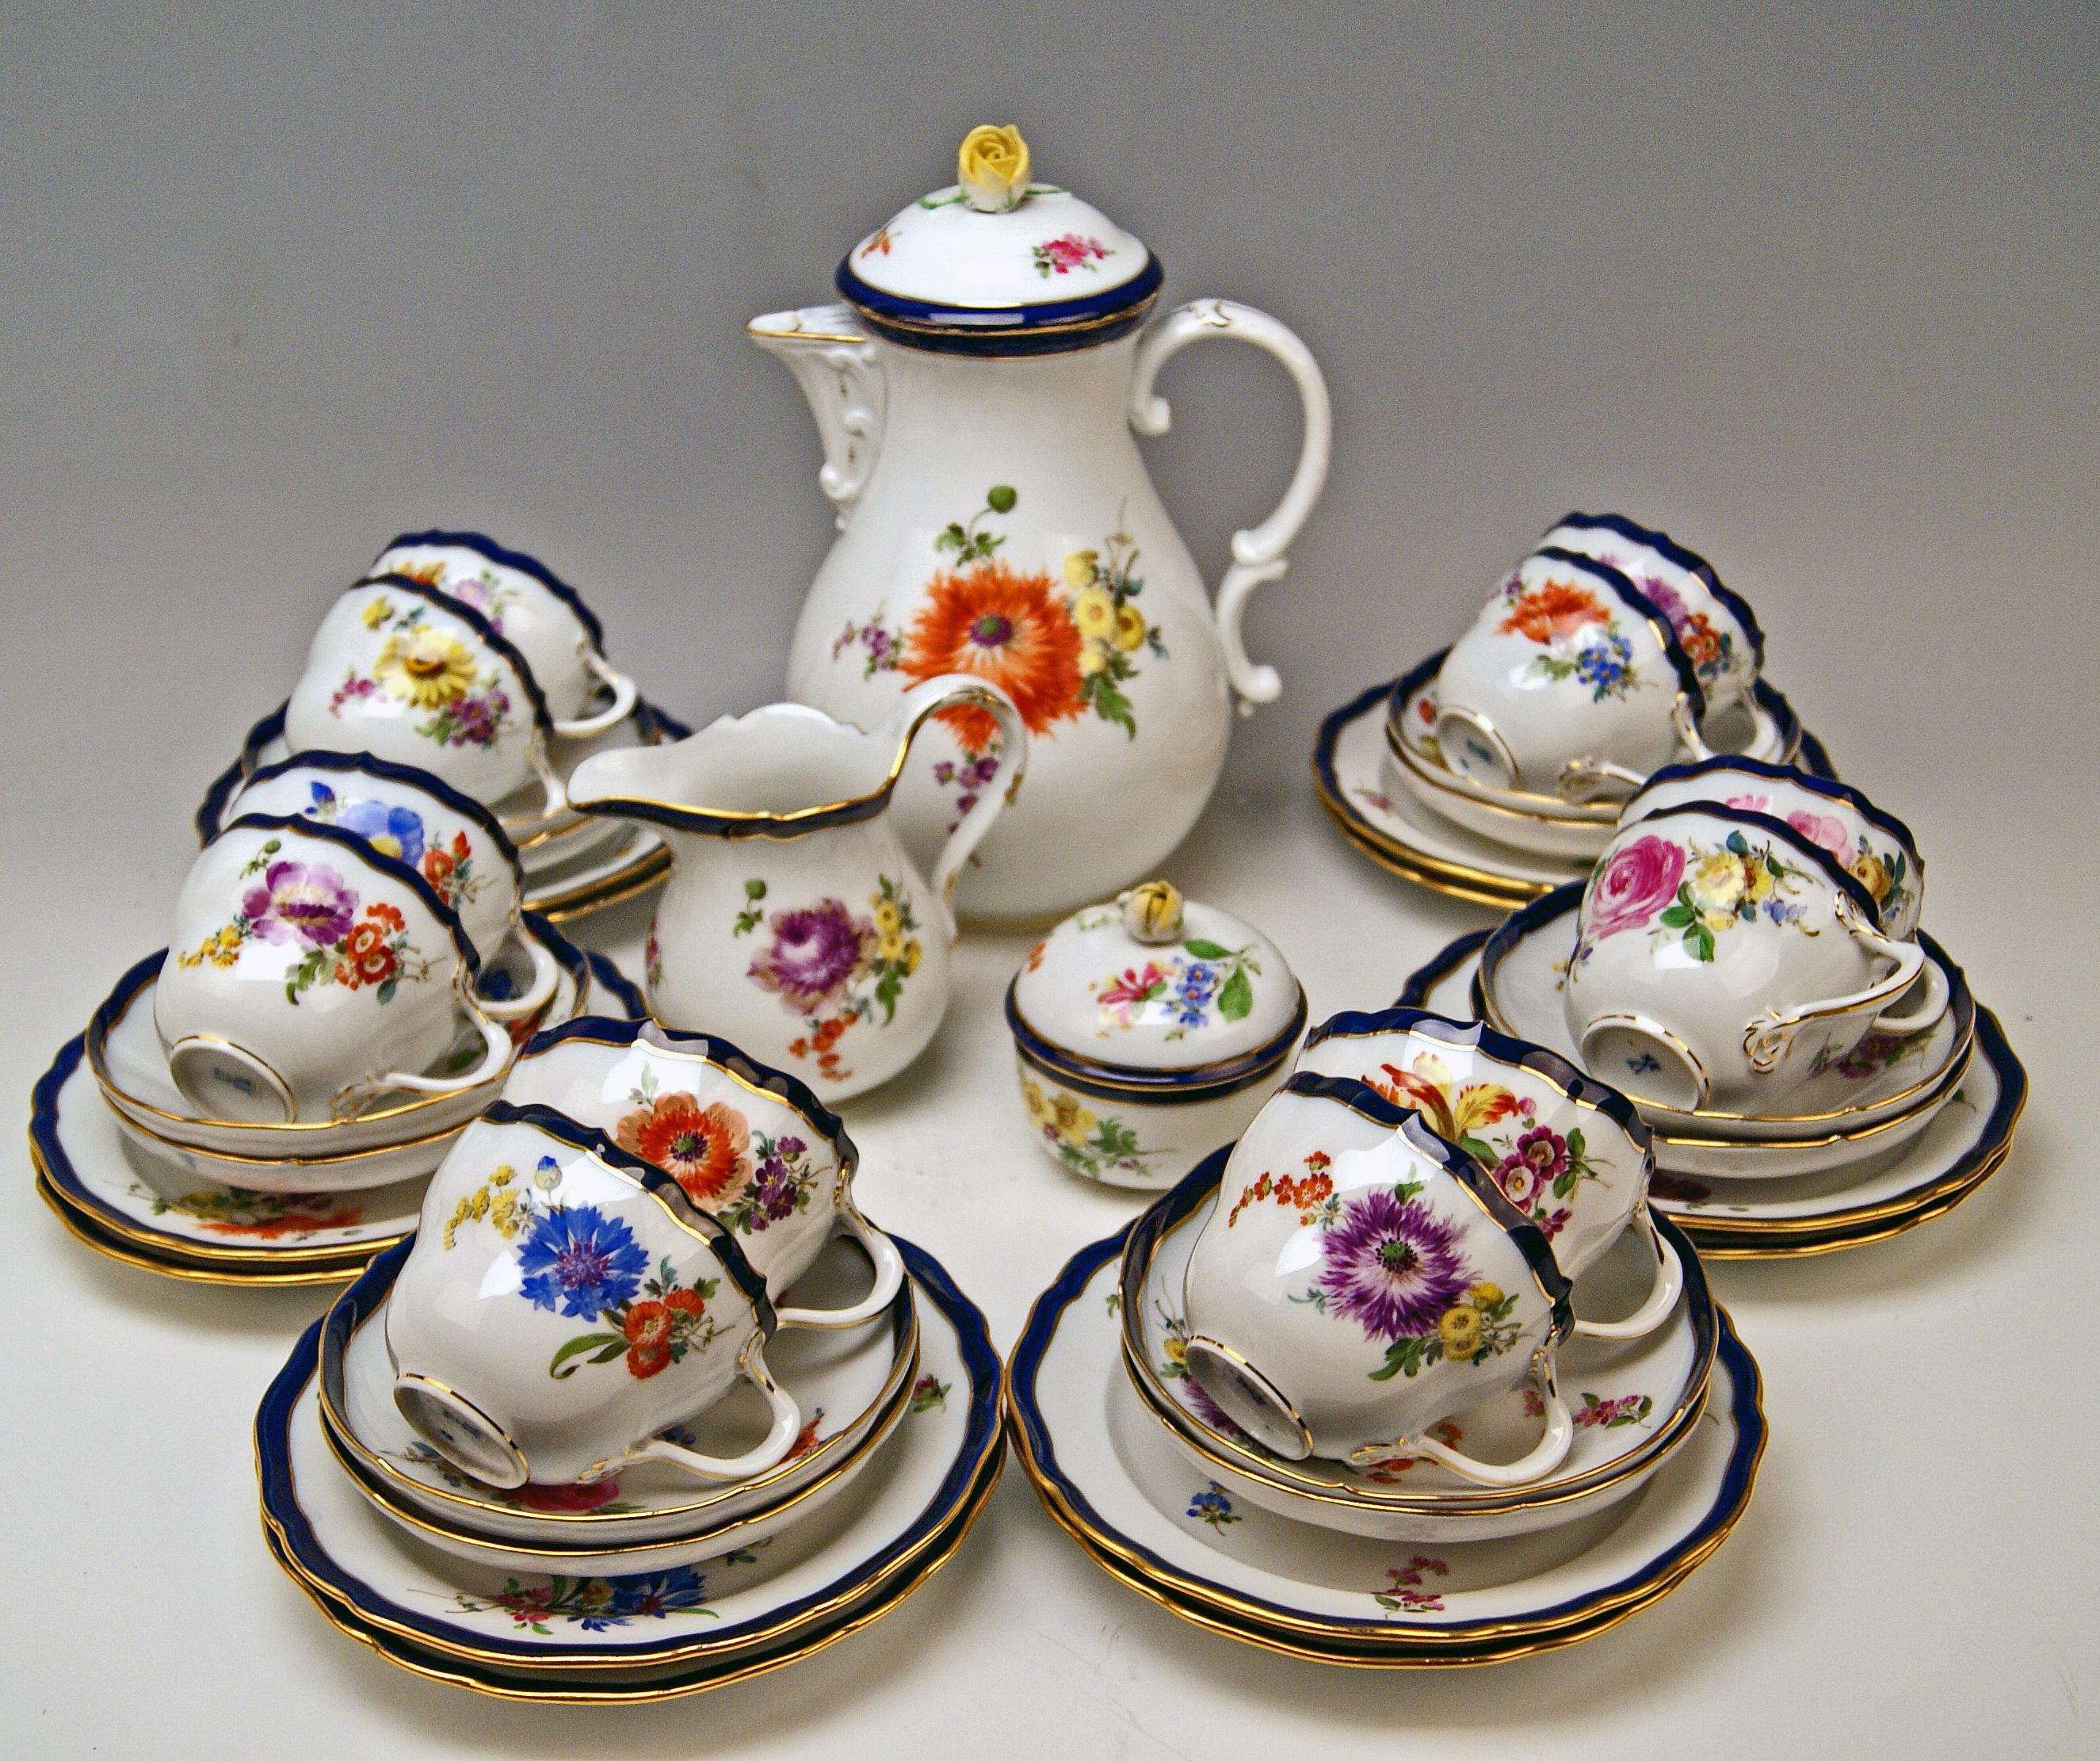 We invite you here to look at a splendid Meissen Coffee Set for twelve persons: 

This coffee set is of FINEST APPEARANCE due to gorgeous various multicolored flower paintings: 
Flower bouquets and smaller flowers laid on white porcelain = this